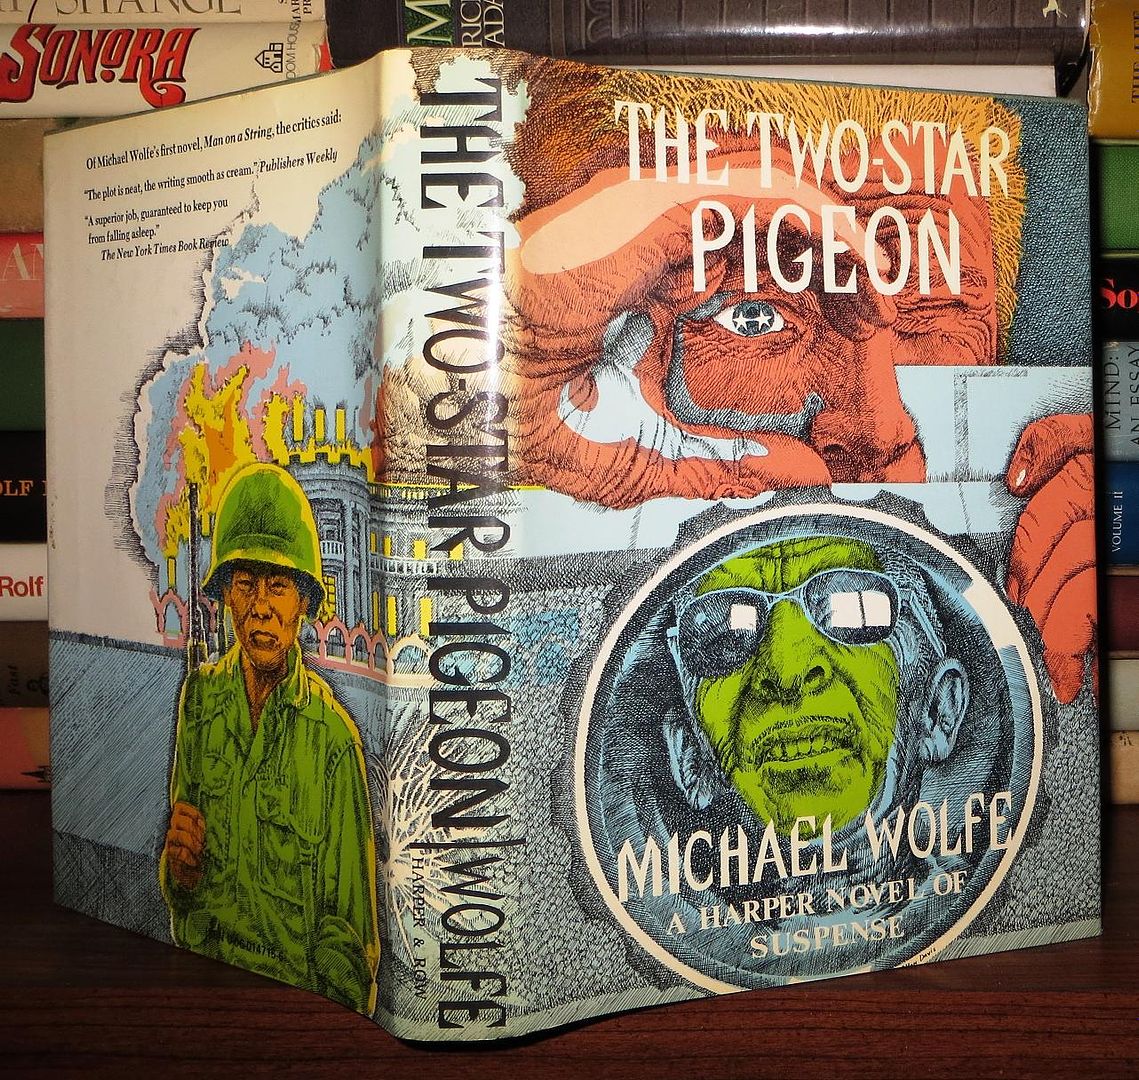 WOLFE, MICHAEL - The Two-Star Pigeon a Harper Novel of Suspense